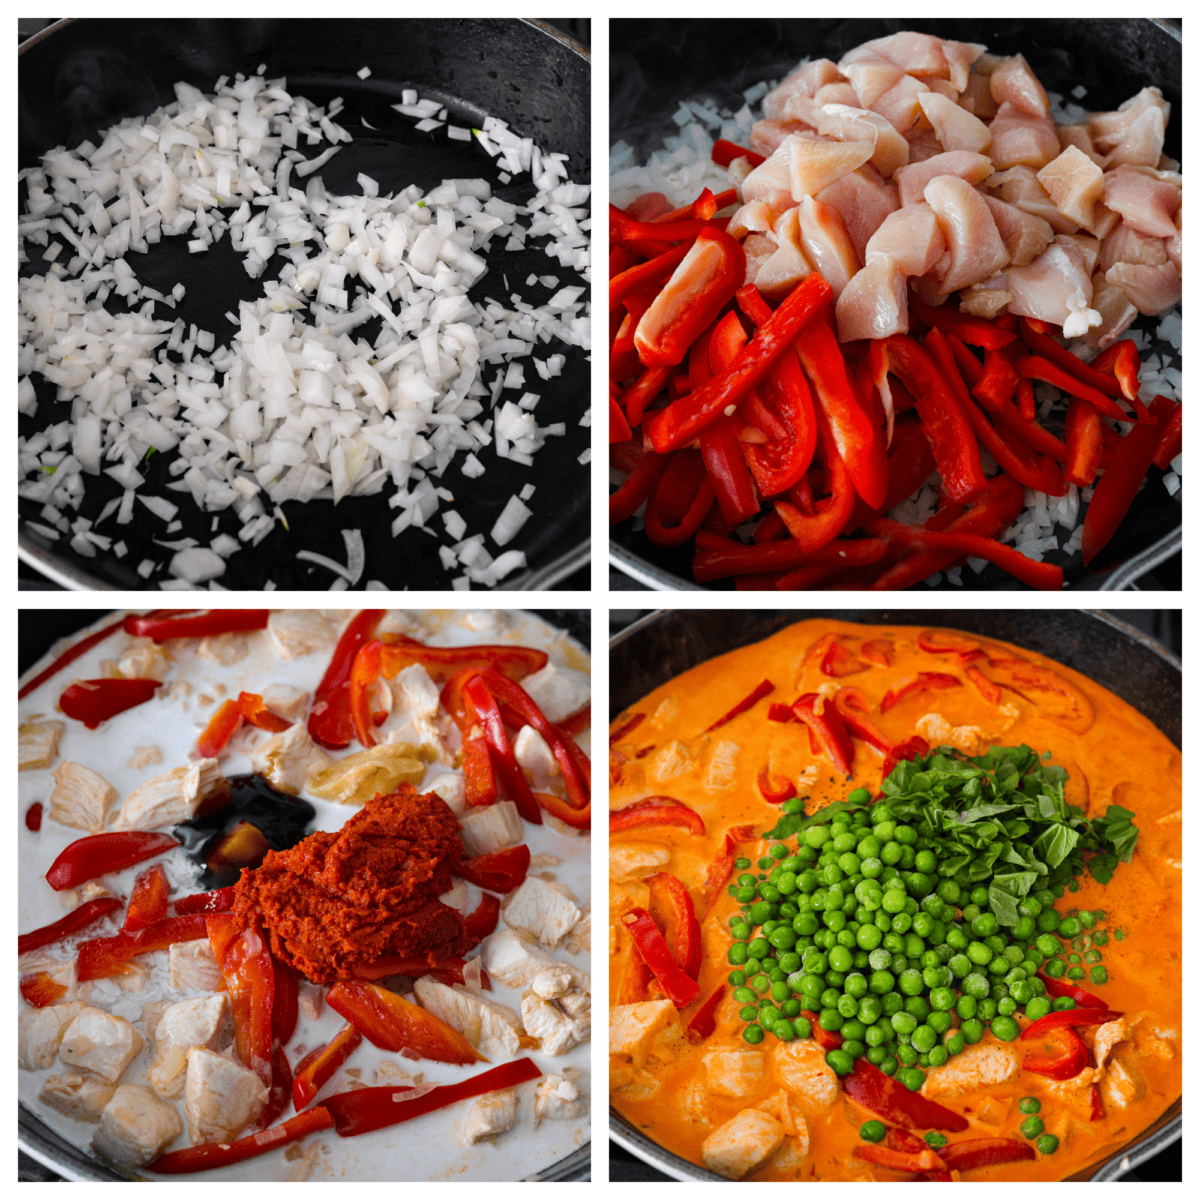 4-photo collage of all of the curry ingredients being cooked together in a skillet.